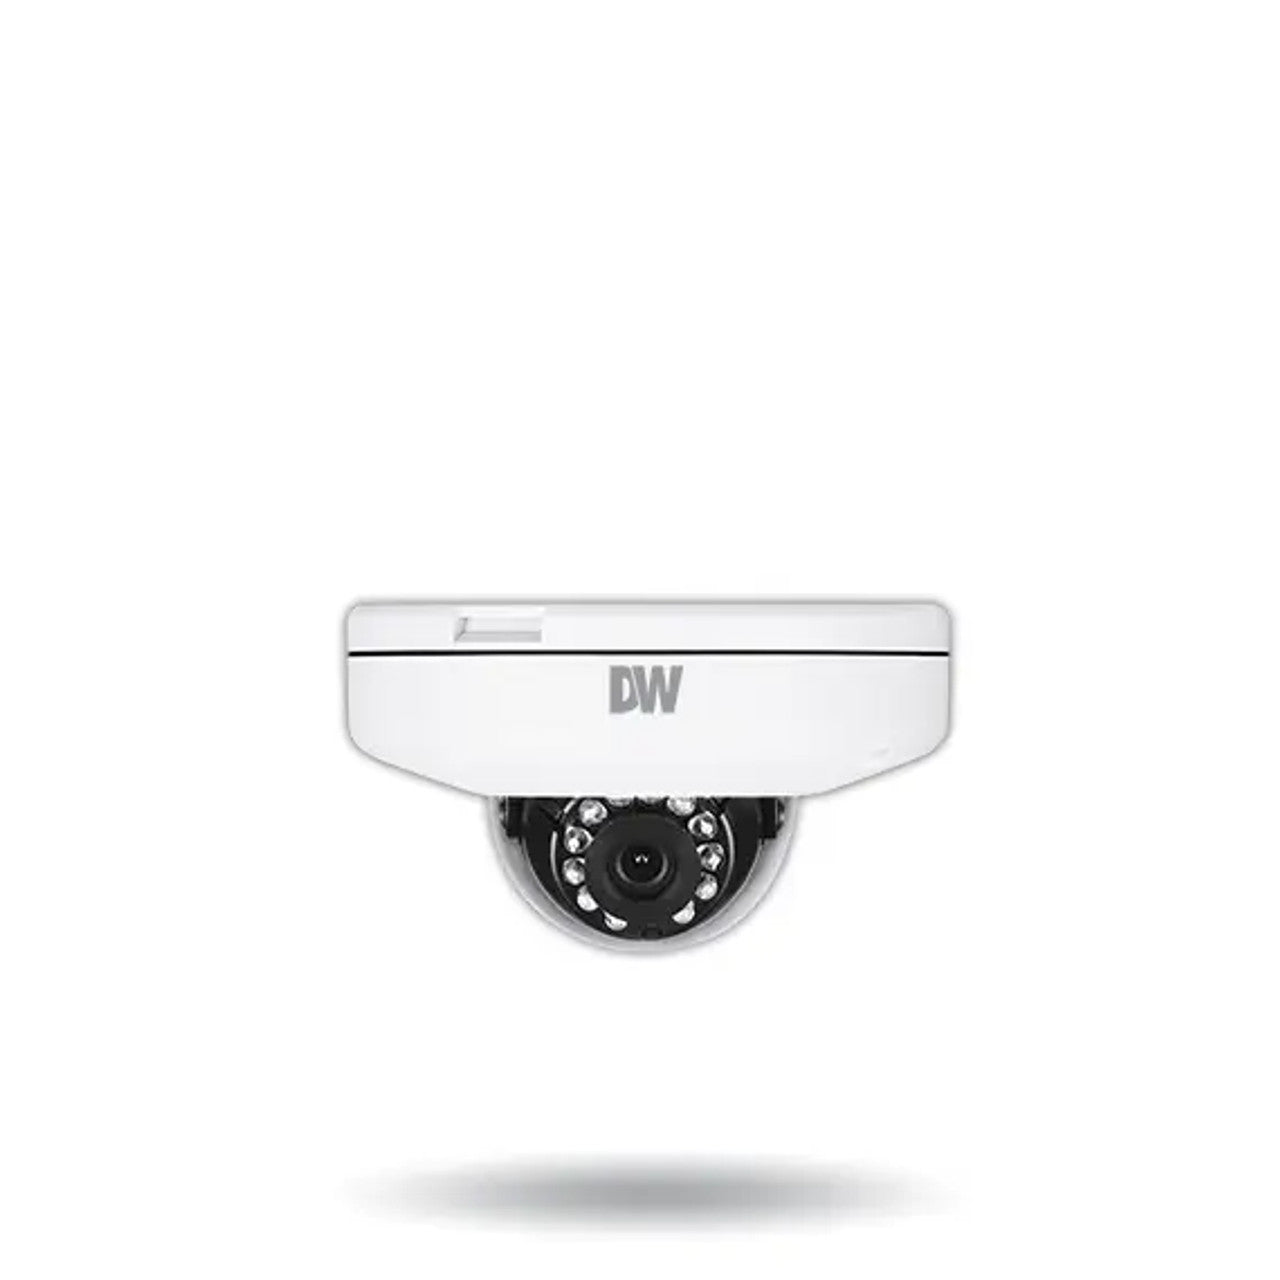 Digital Watchdog DWC-MF4Wi6WC1T 4MP Night Vision Outdoor Dome IP Security Camera, CaaS, 1TB Storage, 6.0mm Fixed Lens